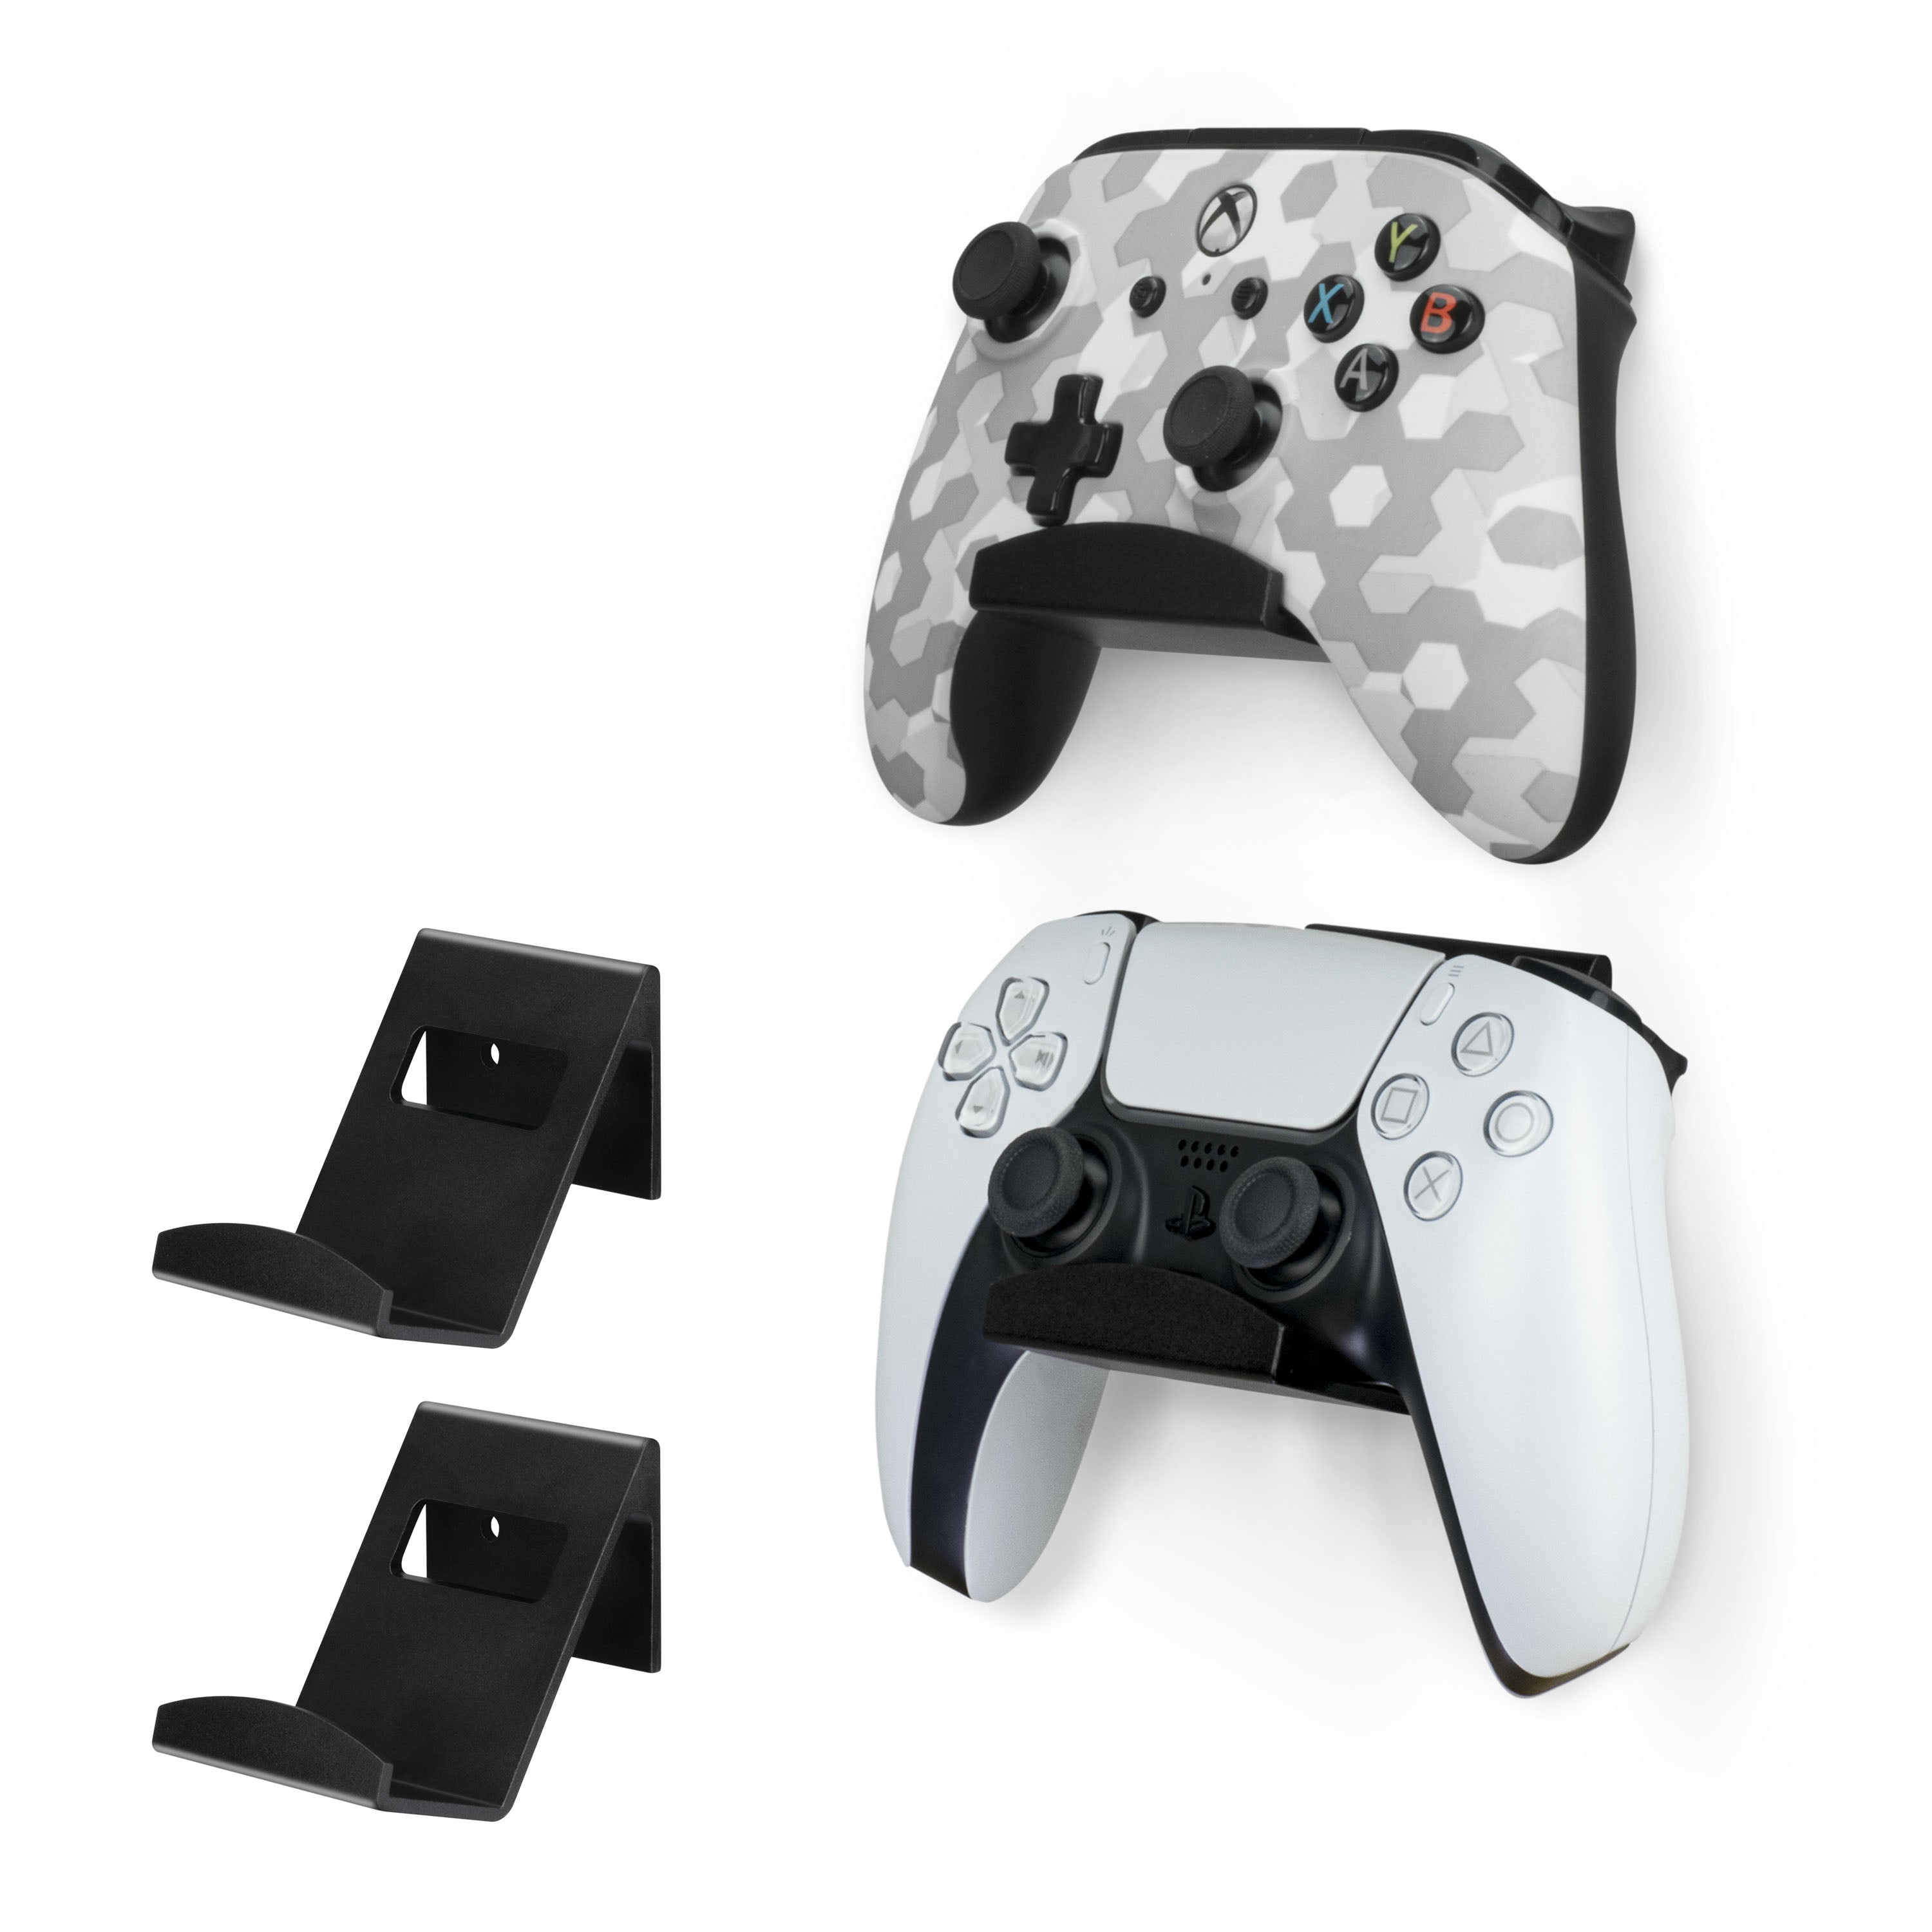 PS5 Pro Controller - White